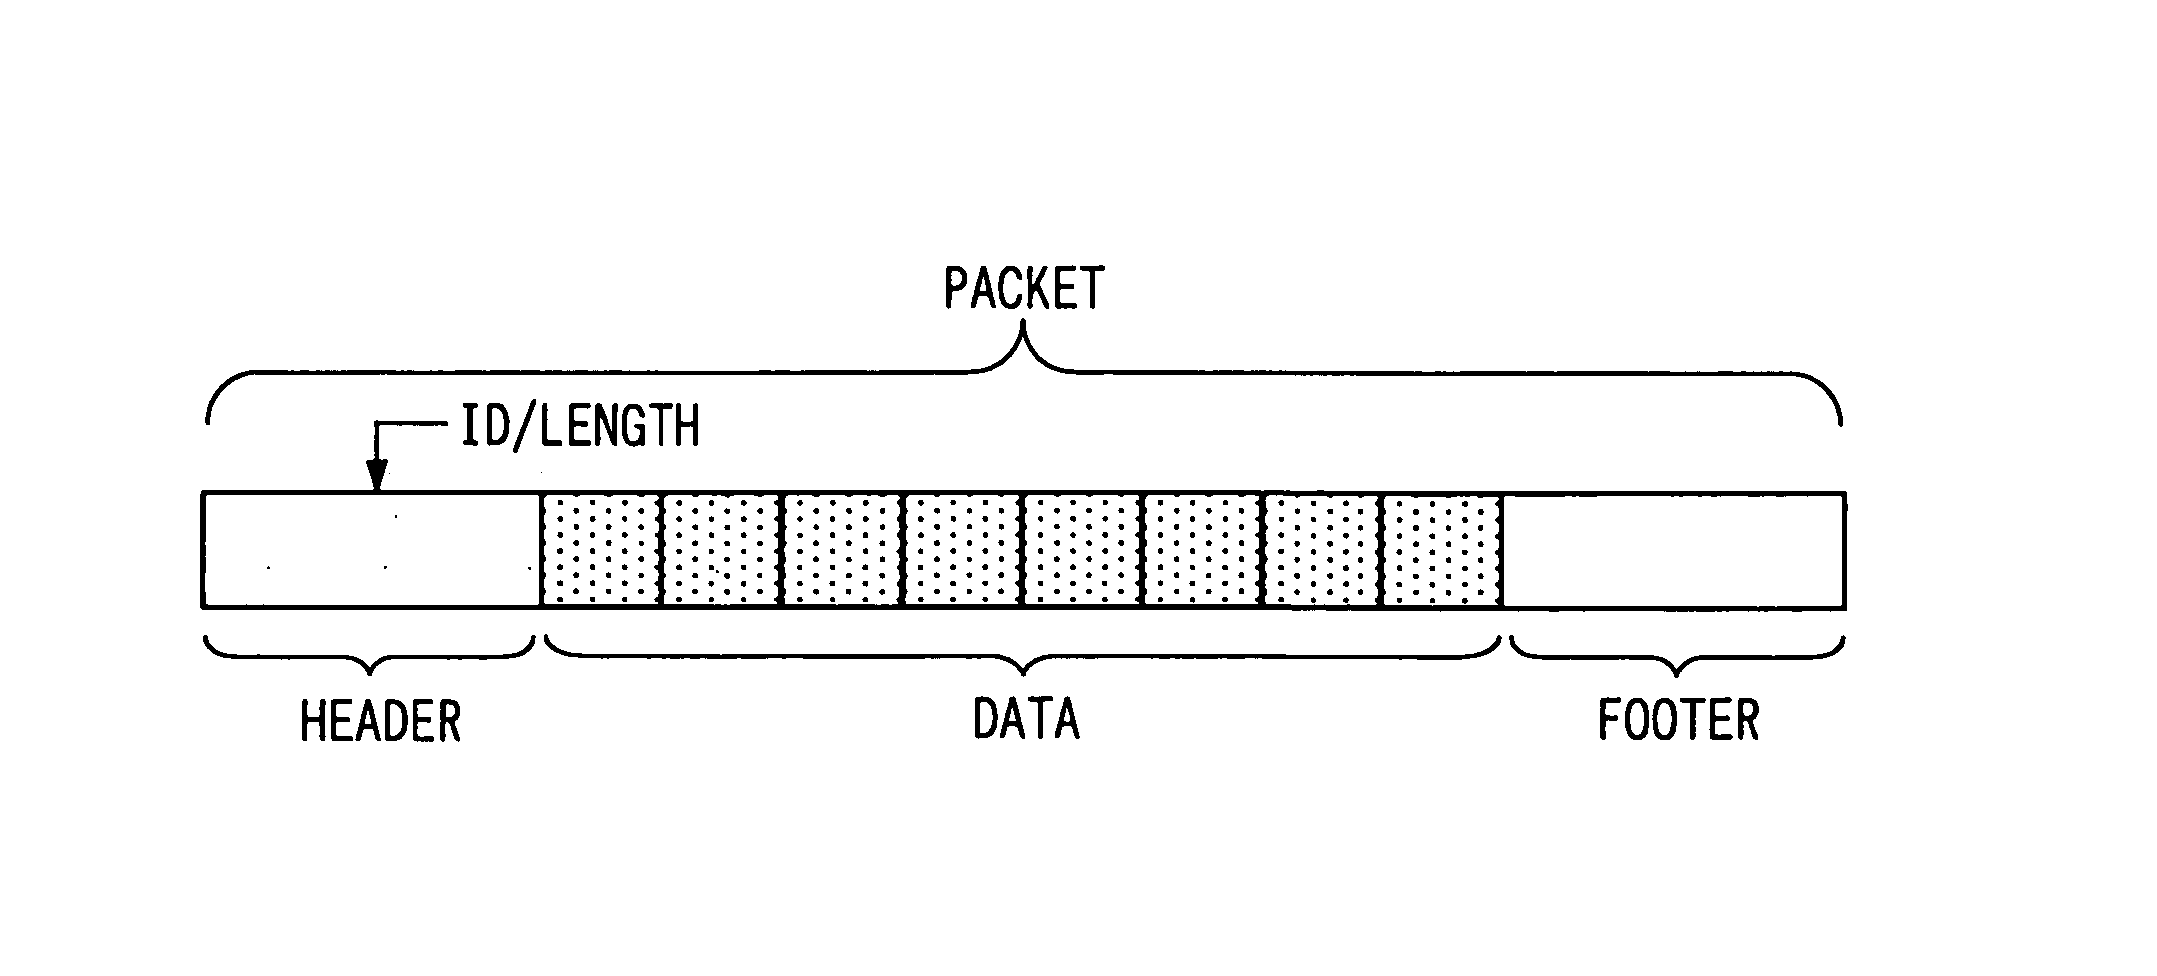 Communications system and packet structure